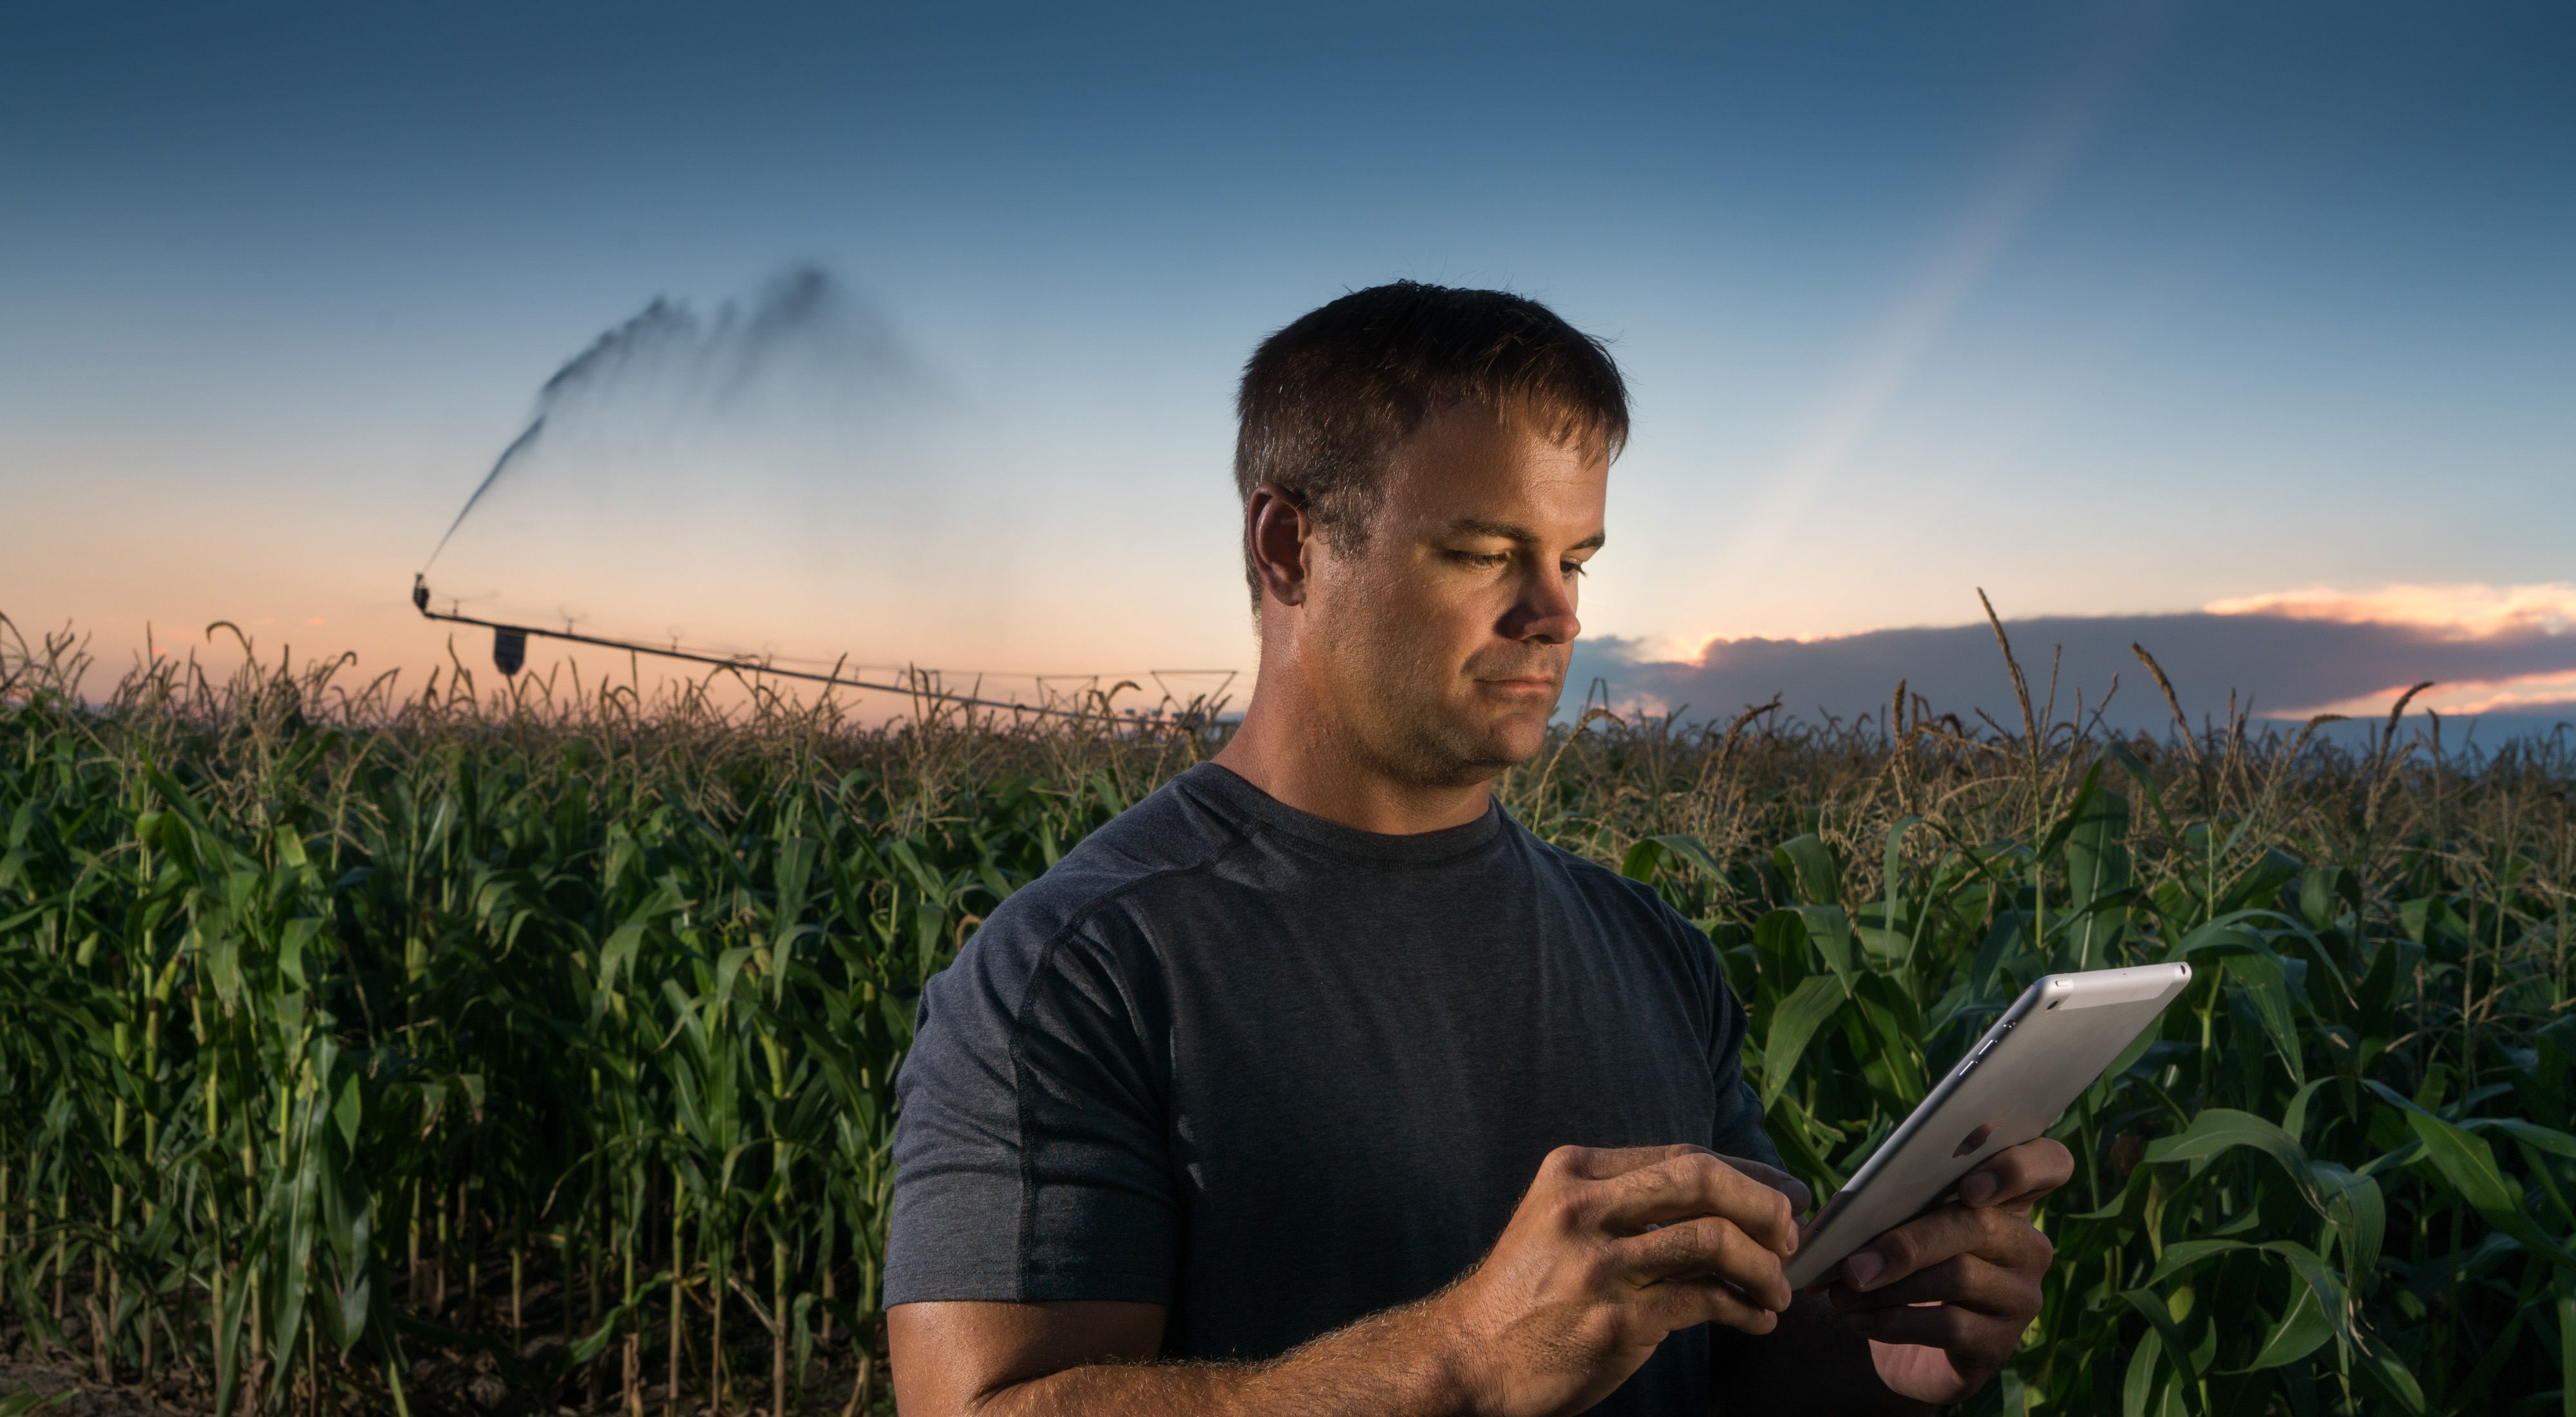 Nebraska Farmer Mike Svoboda stands in his field using a tablet to control the irrigation